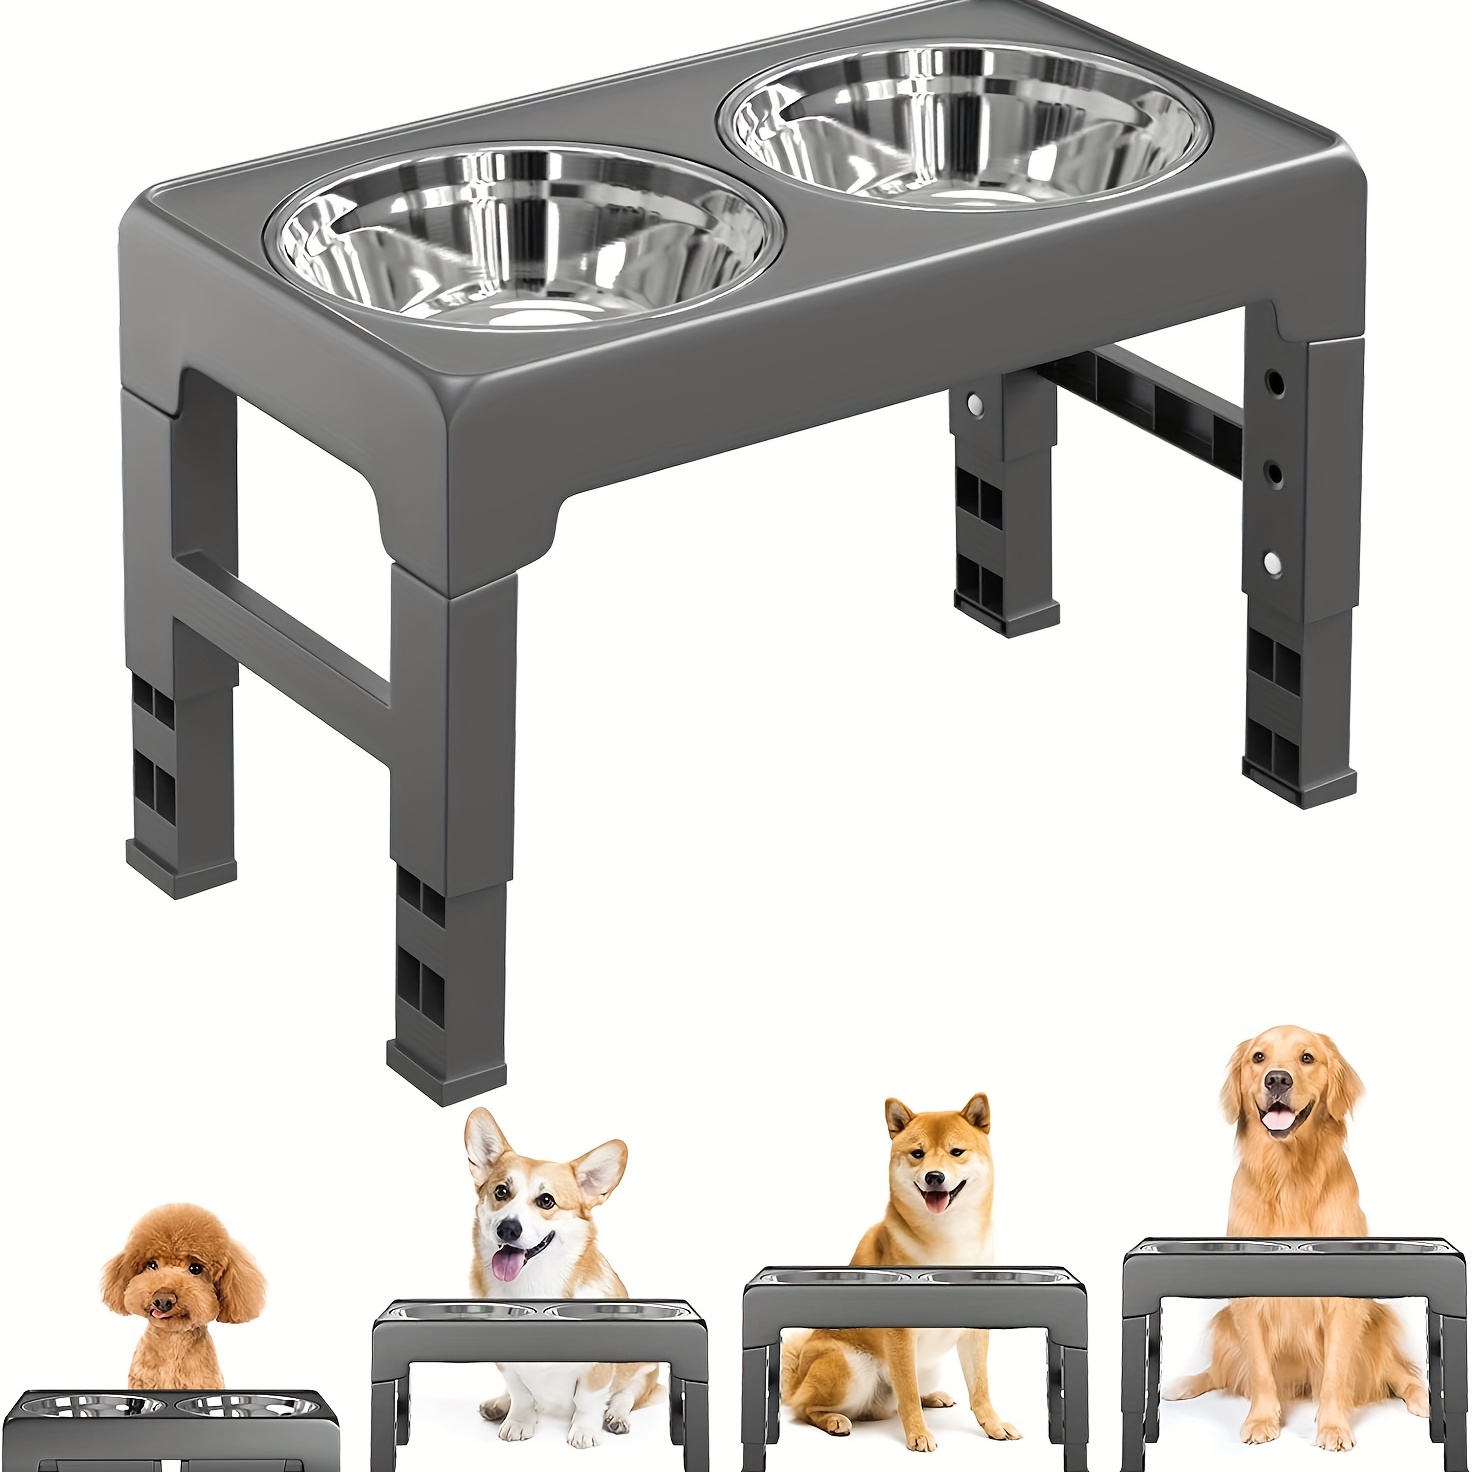 Elevated Dog Bowl for Large Dogs,Raised Dog Bowl Stand,Adjusts to 8 Heights  (2.75- 20) Dog Feeding Station with 2 Stainless Steel Dog Bowls,for